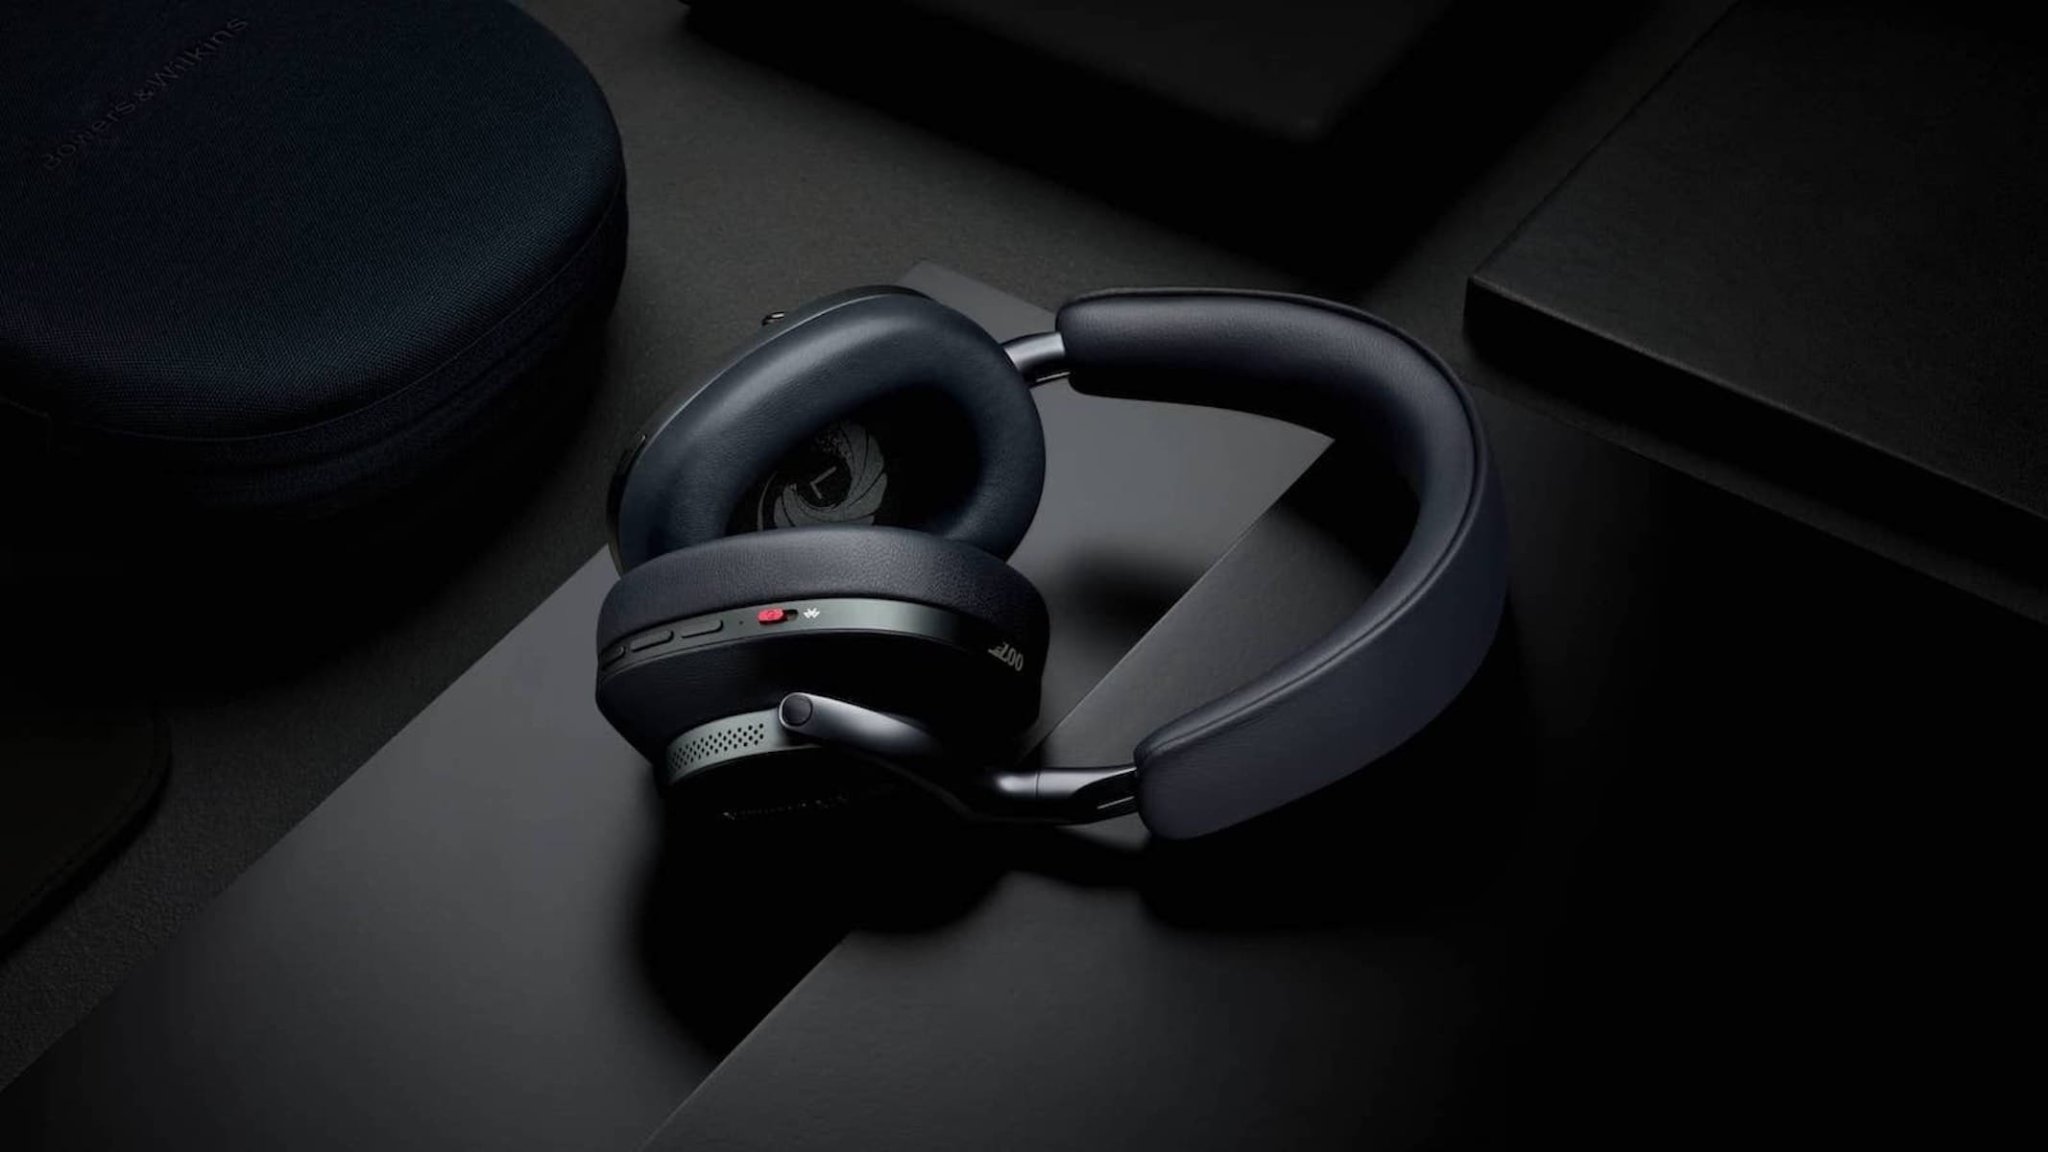 Treat yourself to these luxurious audiophile headphones